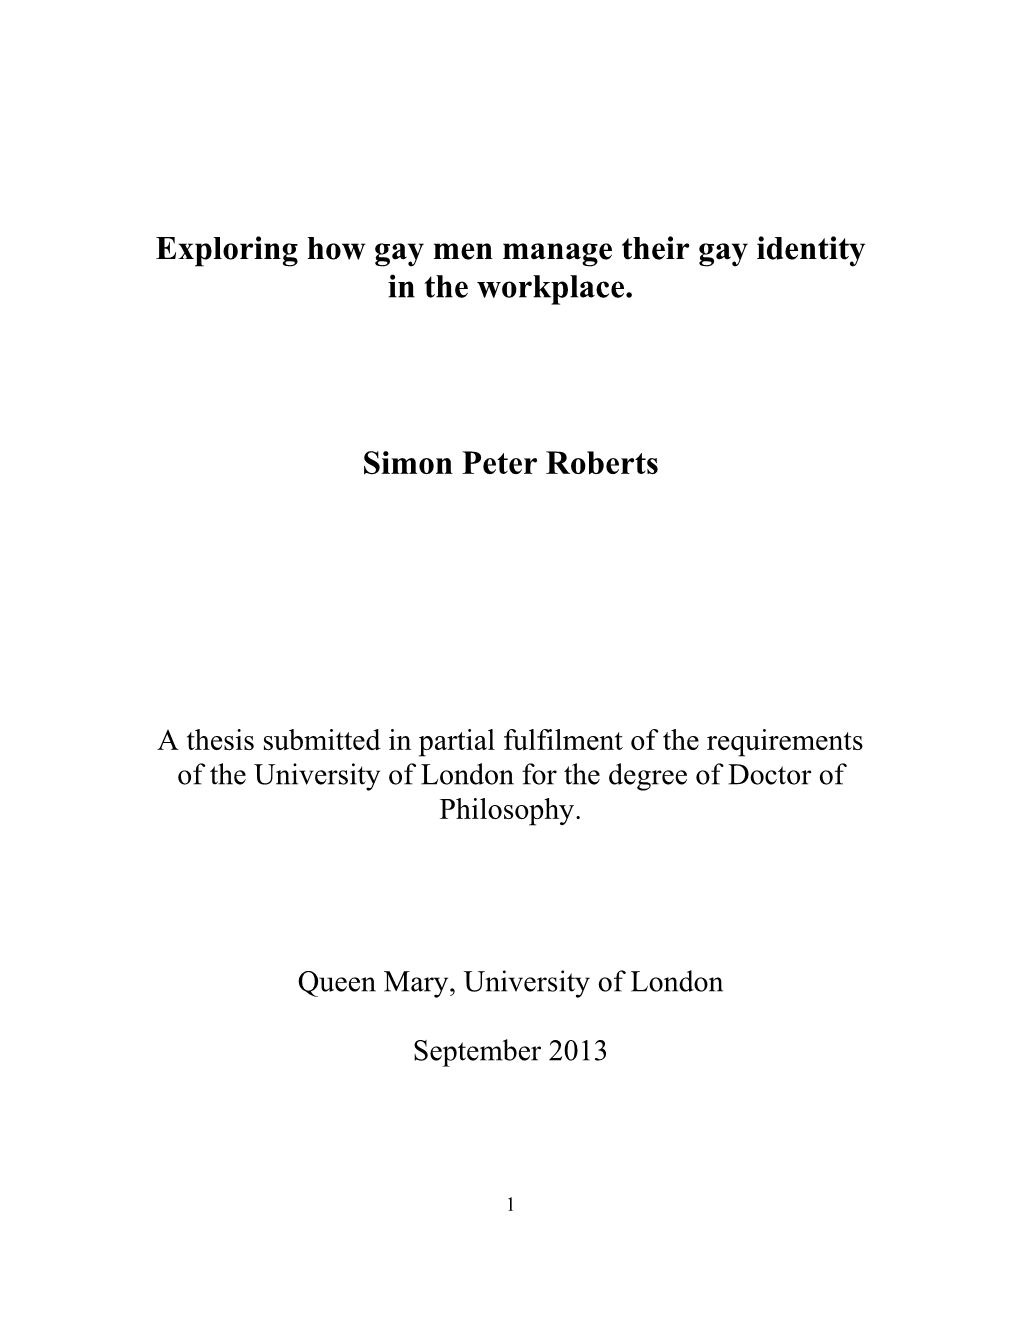 Exploring How Gay Men Manage Their Gay Identity in the Workplace. Simon